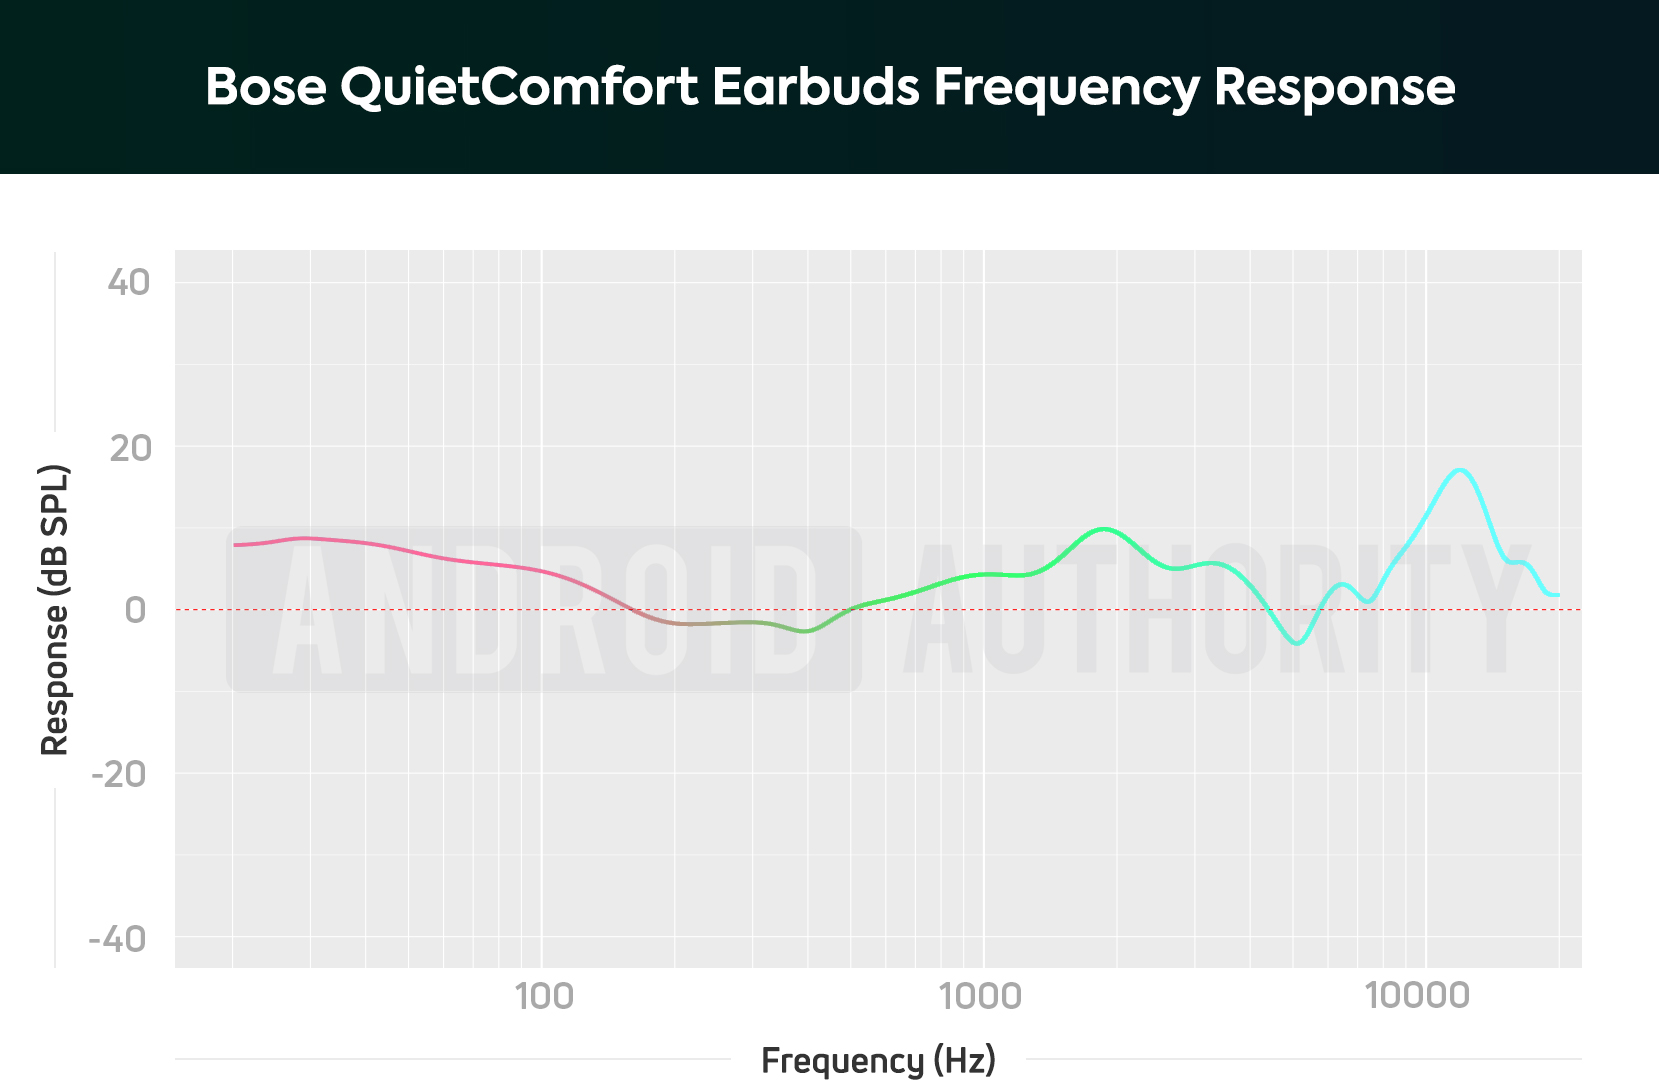 Bose QuietComfort Earbuds AA frequency response chart